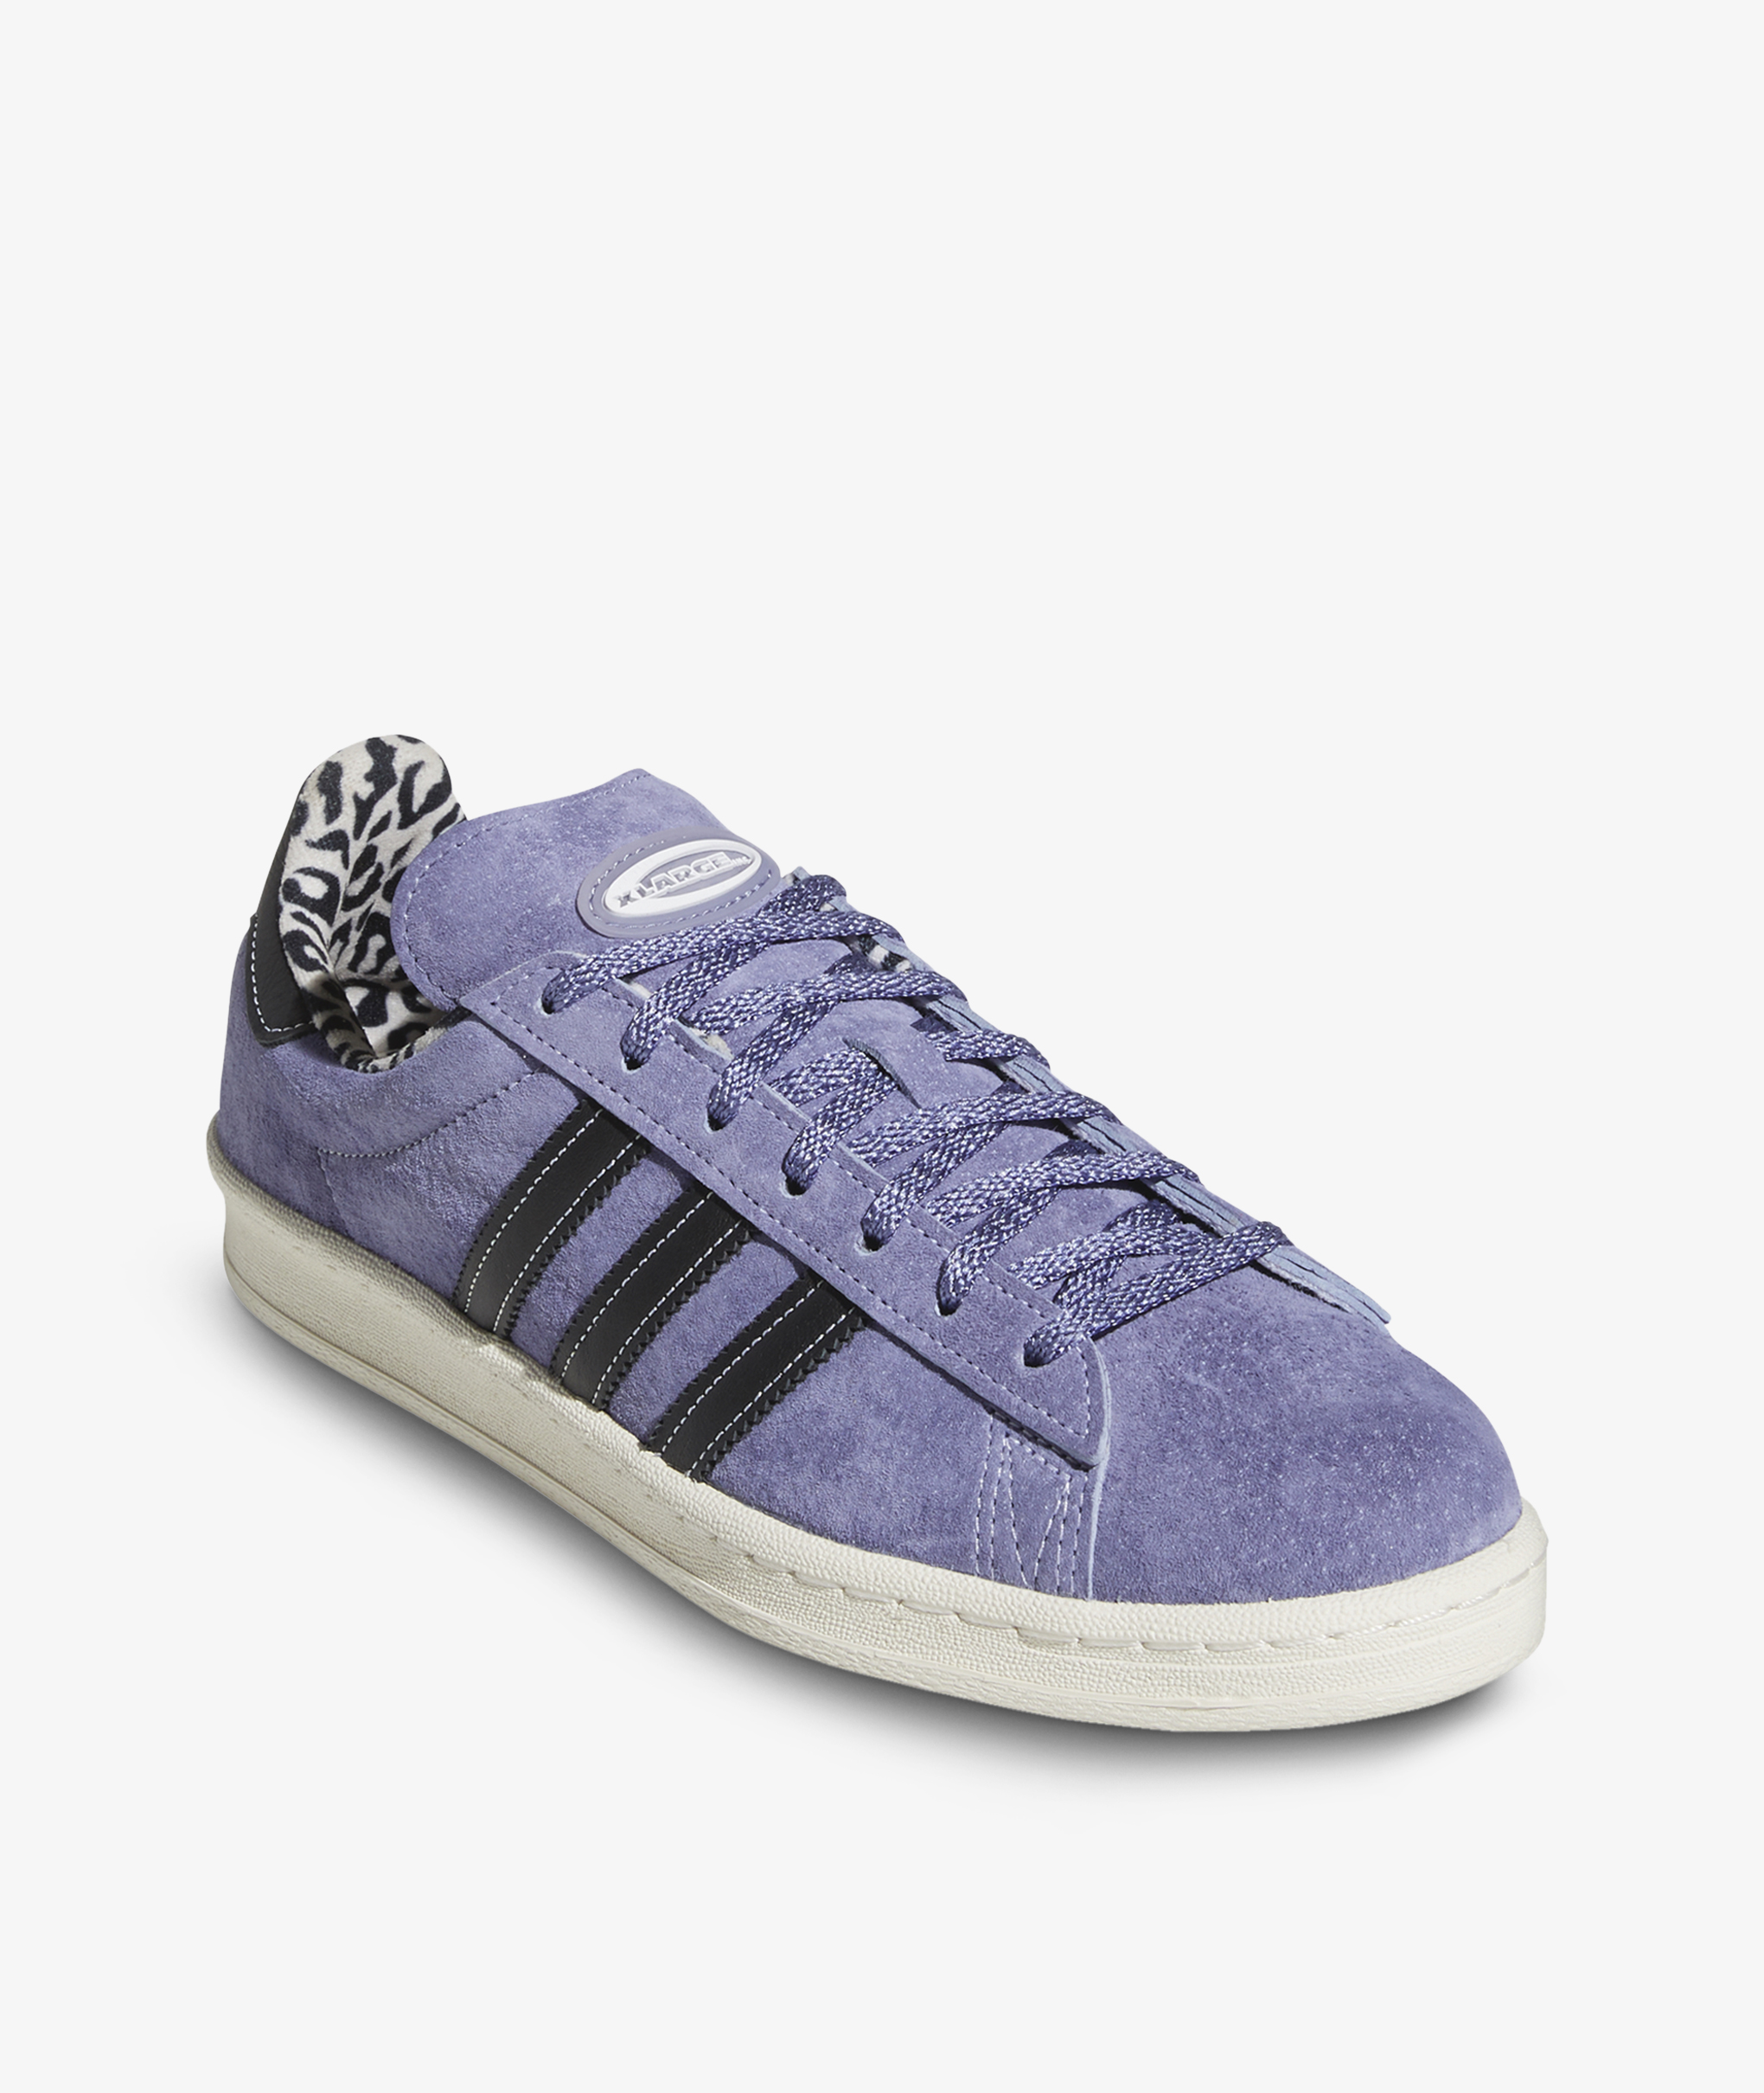 stempel indhold fritid Norse Store | Shipping Worldwide - adidas Campus 80 XLARGE - Purple